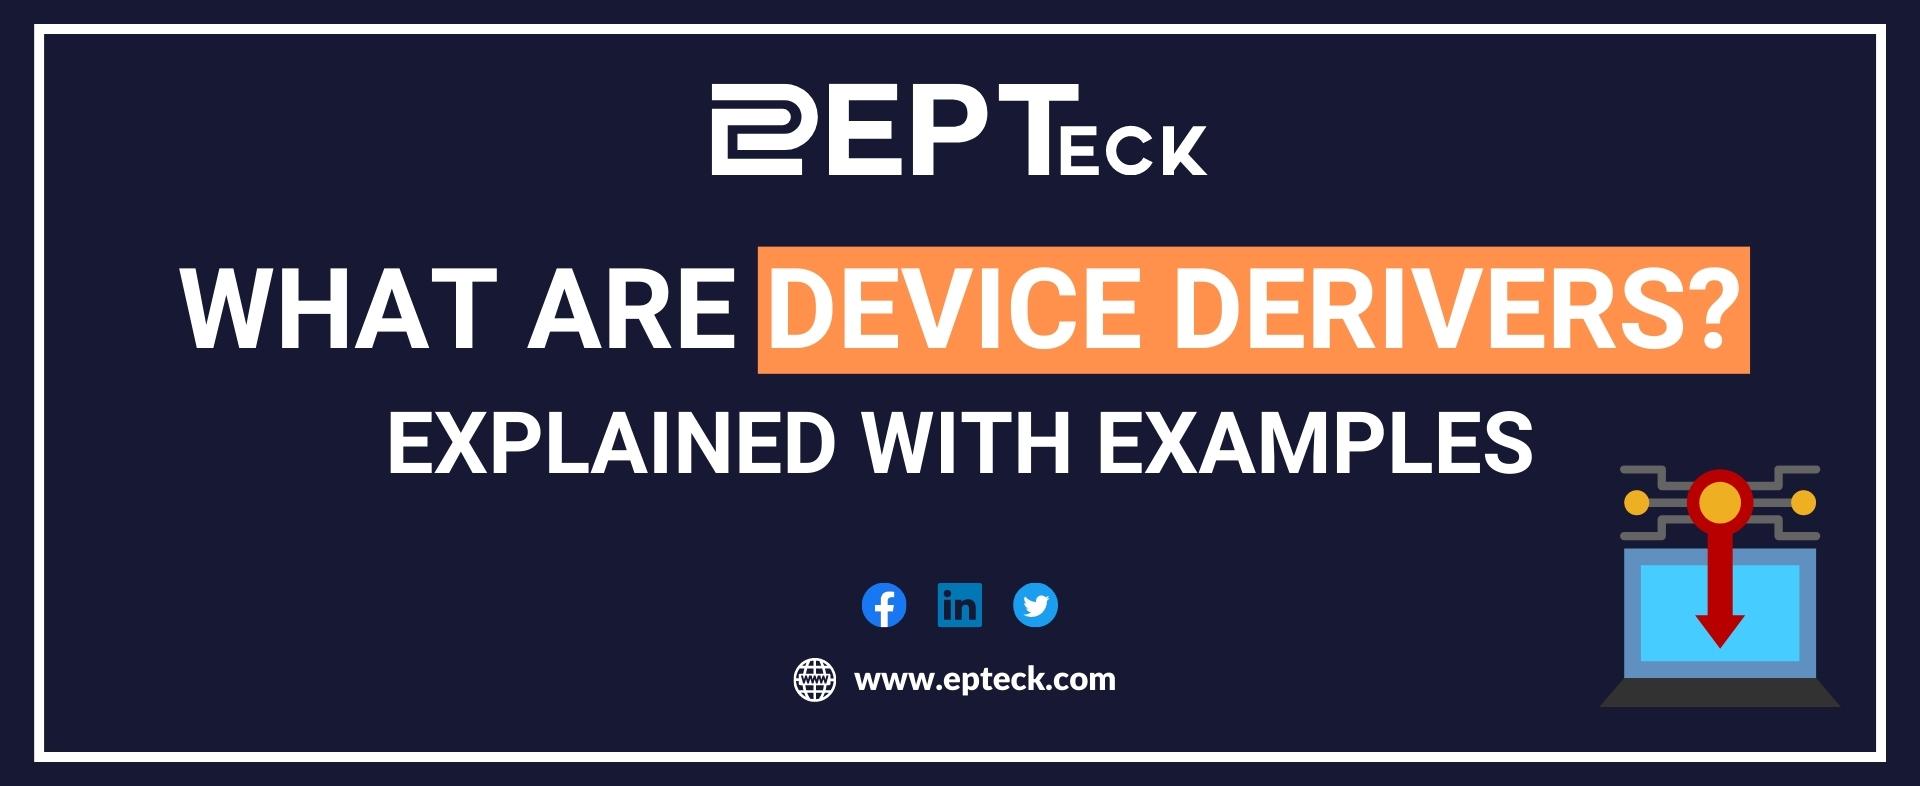 What are Device Drivers? Explained with Examples